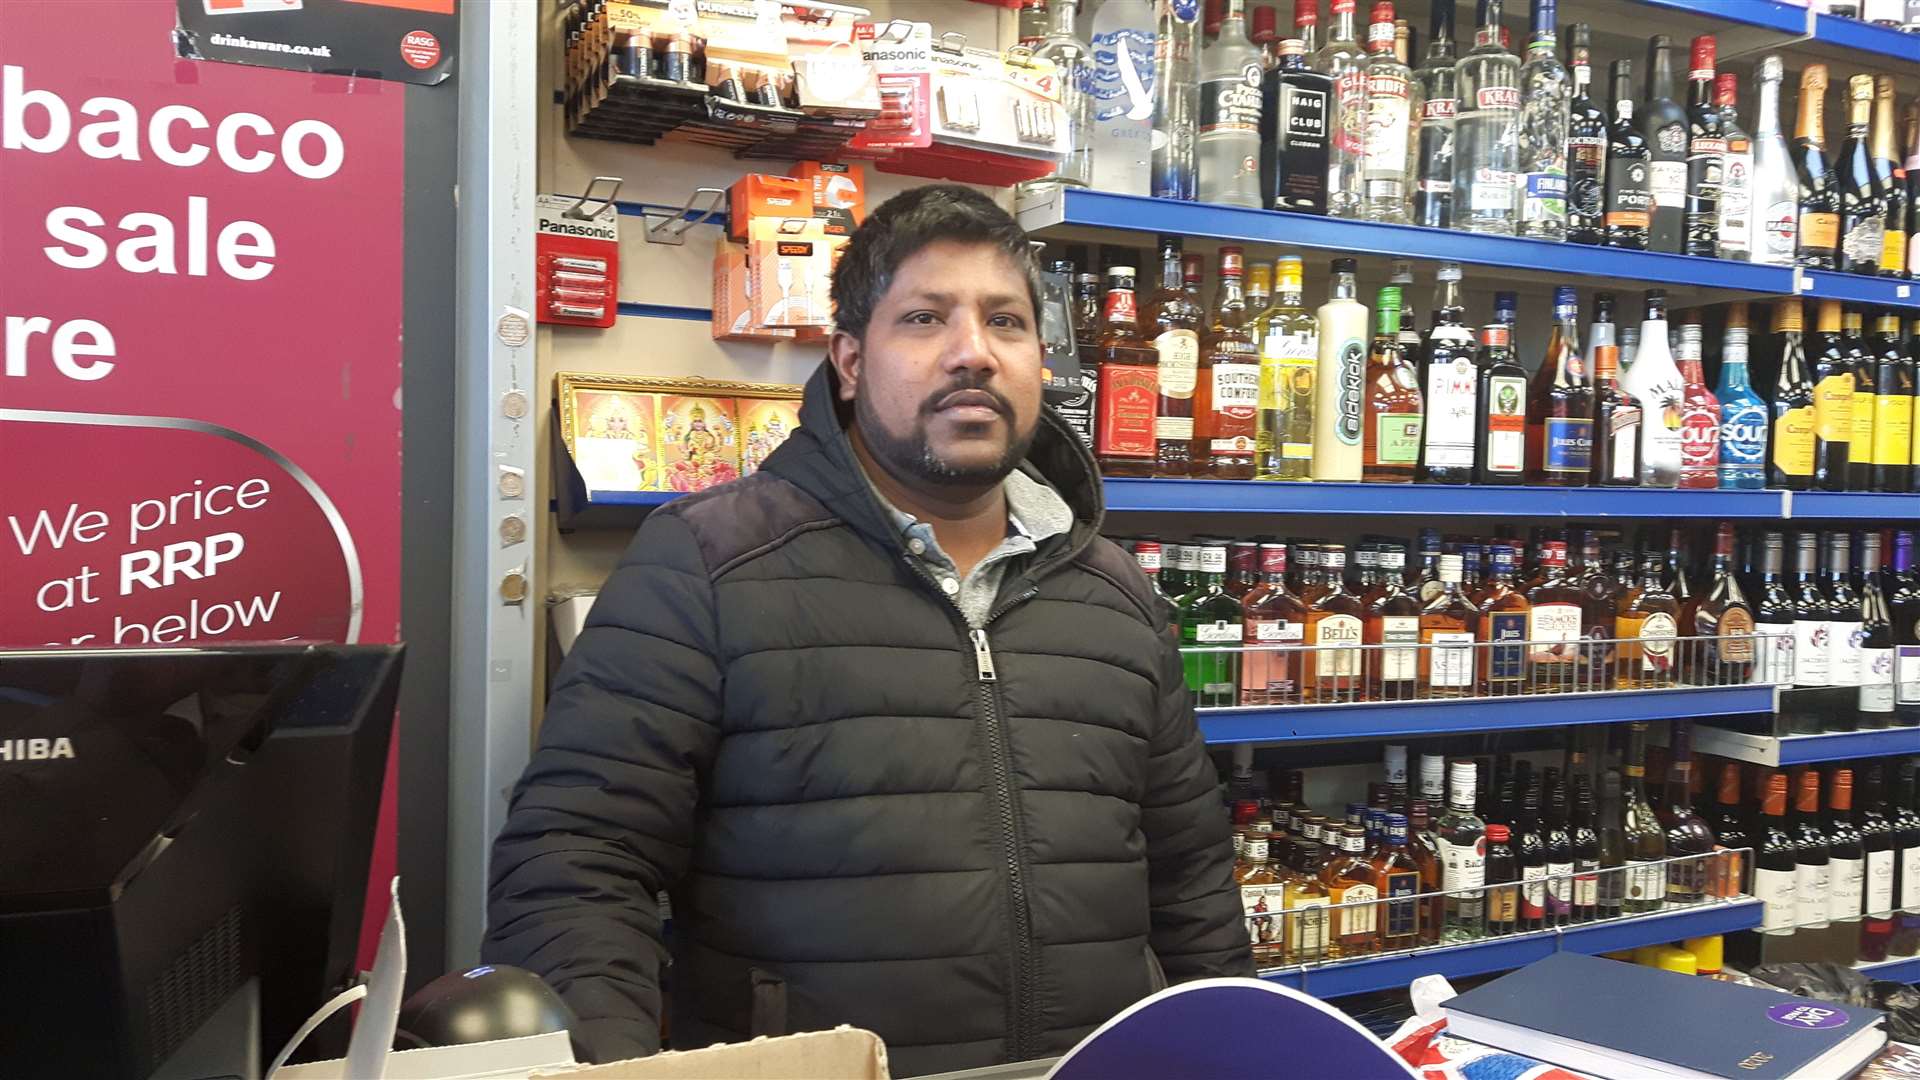 Engarshal Sinnarrsa, the owner of Lucky's Newsagnts on Boughton Parade